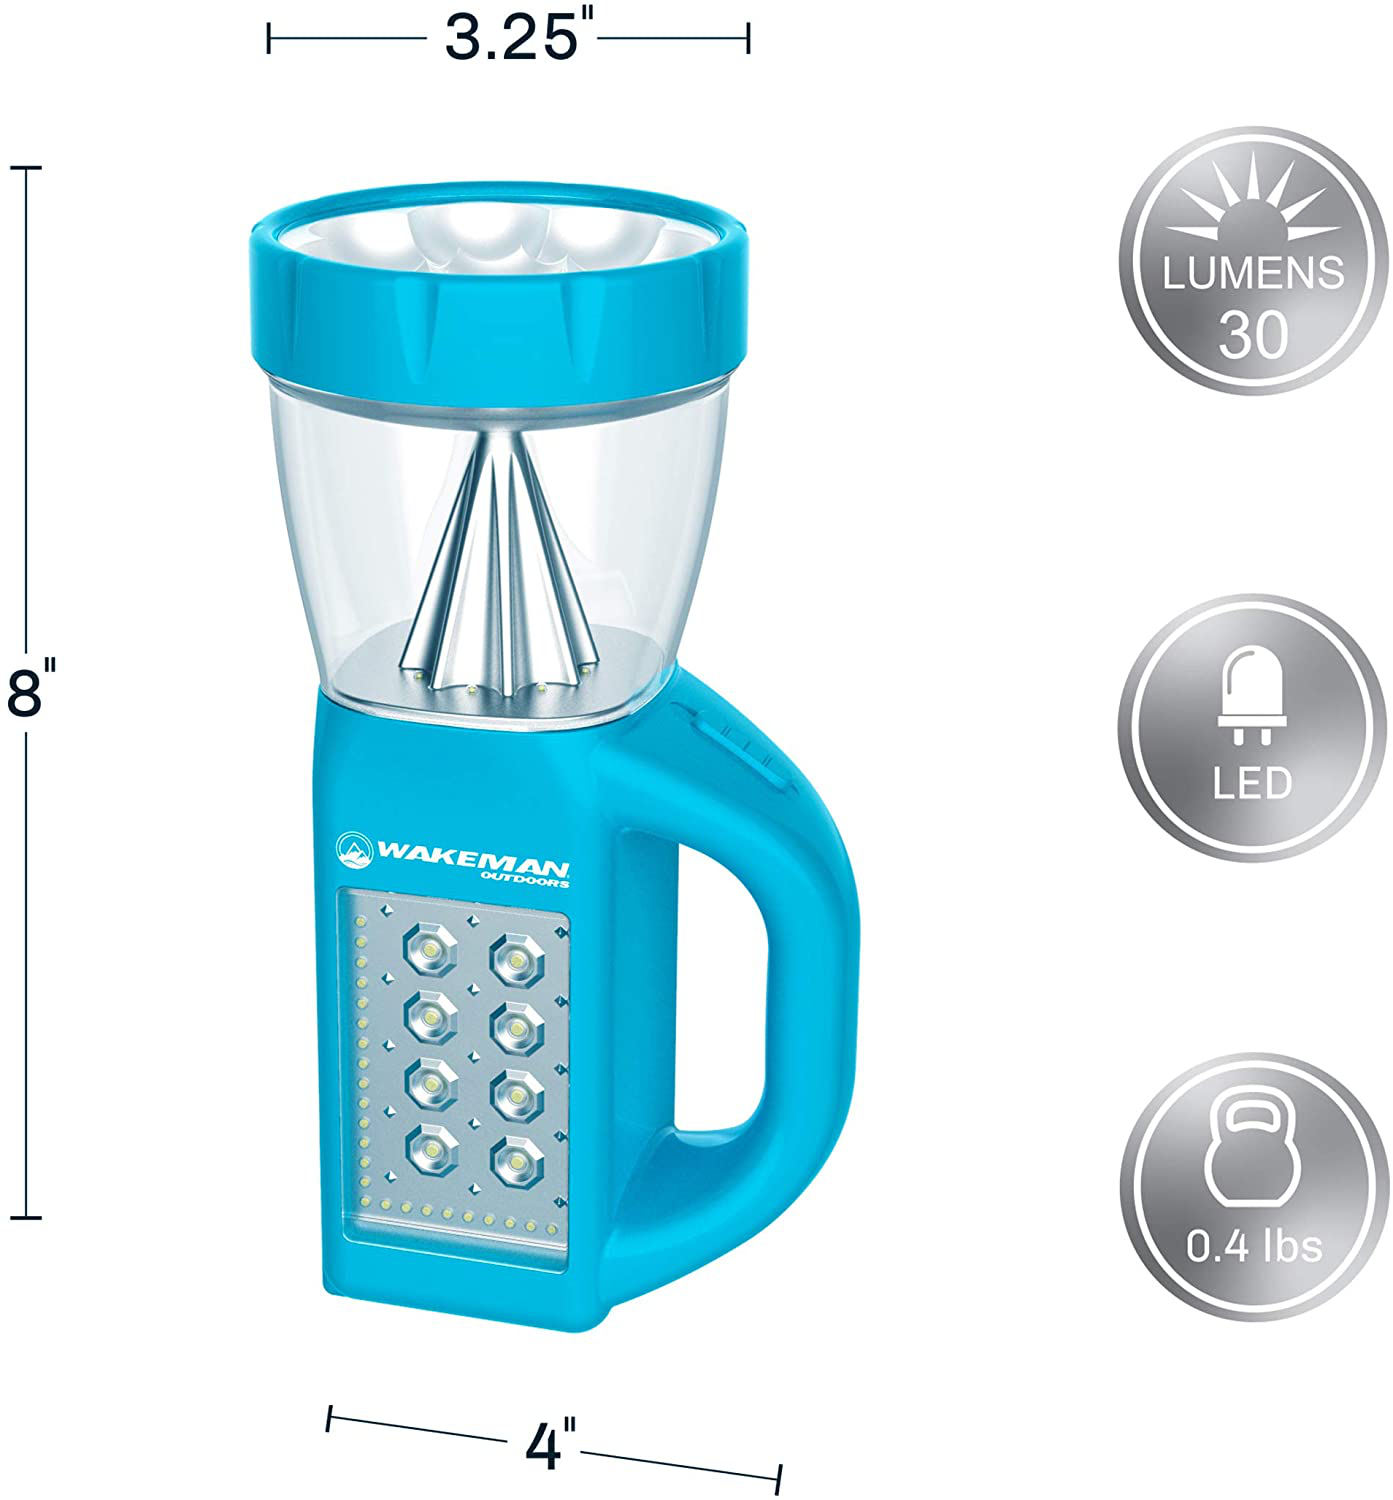 LED Lantern Flashlight Combo- 3-In-1 Lightweight Lamp with Side Panel Light- Portable for Camping, Hiking & Emergencies by Wakeman Outdoors (Blue)